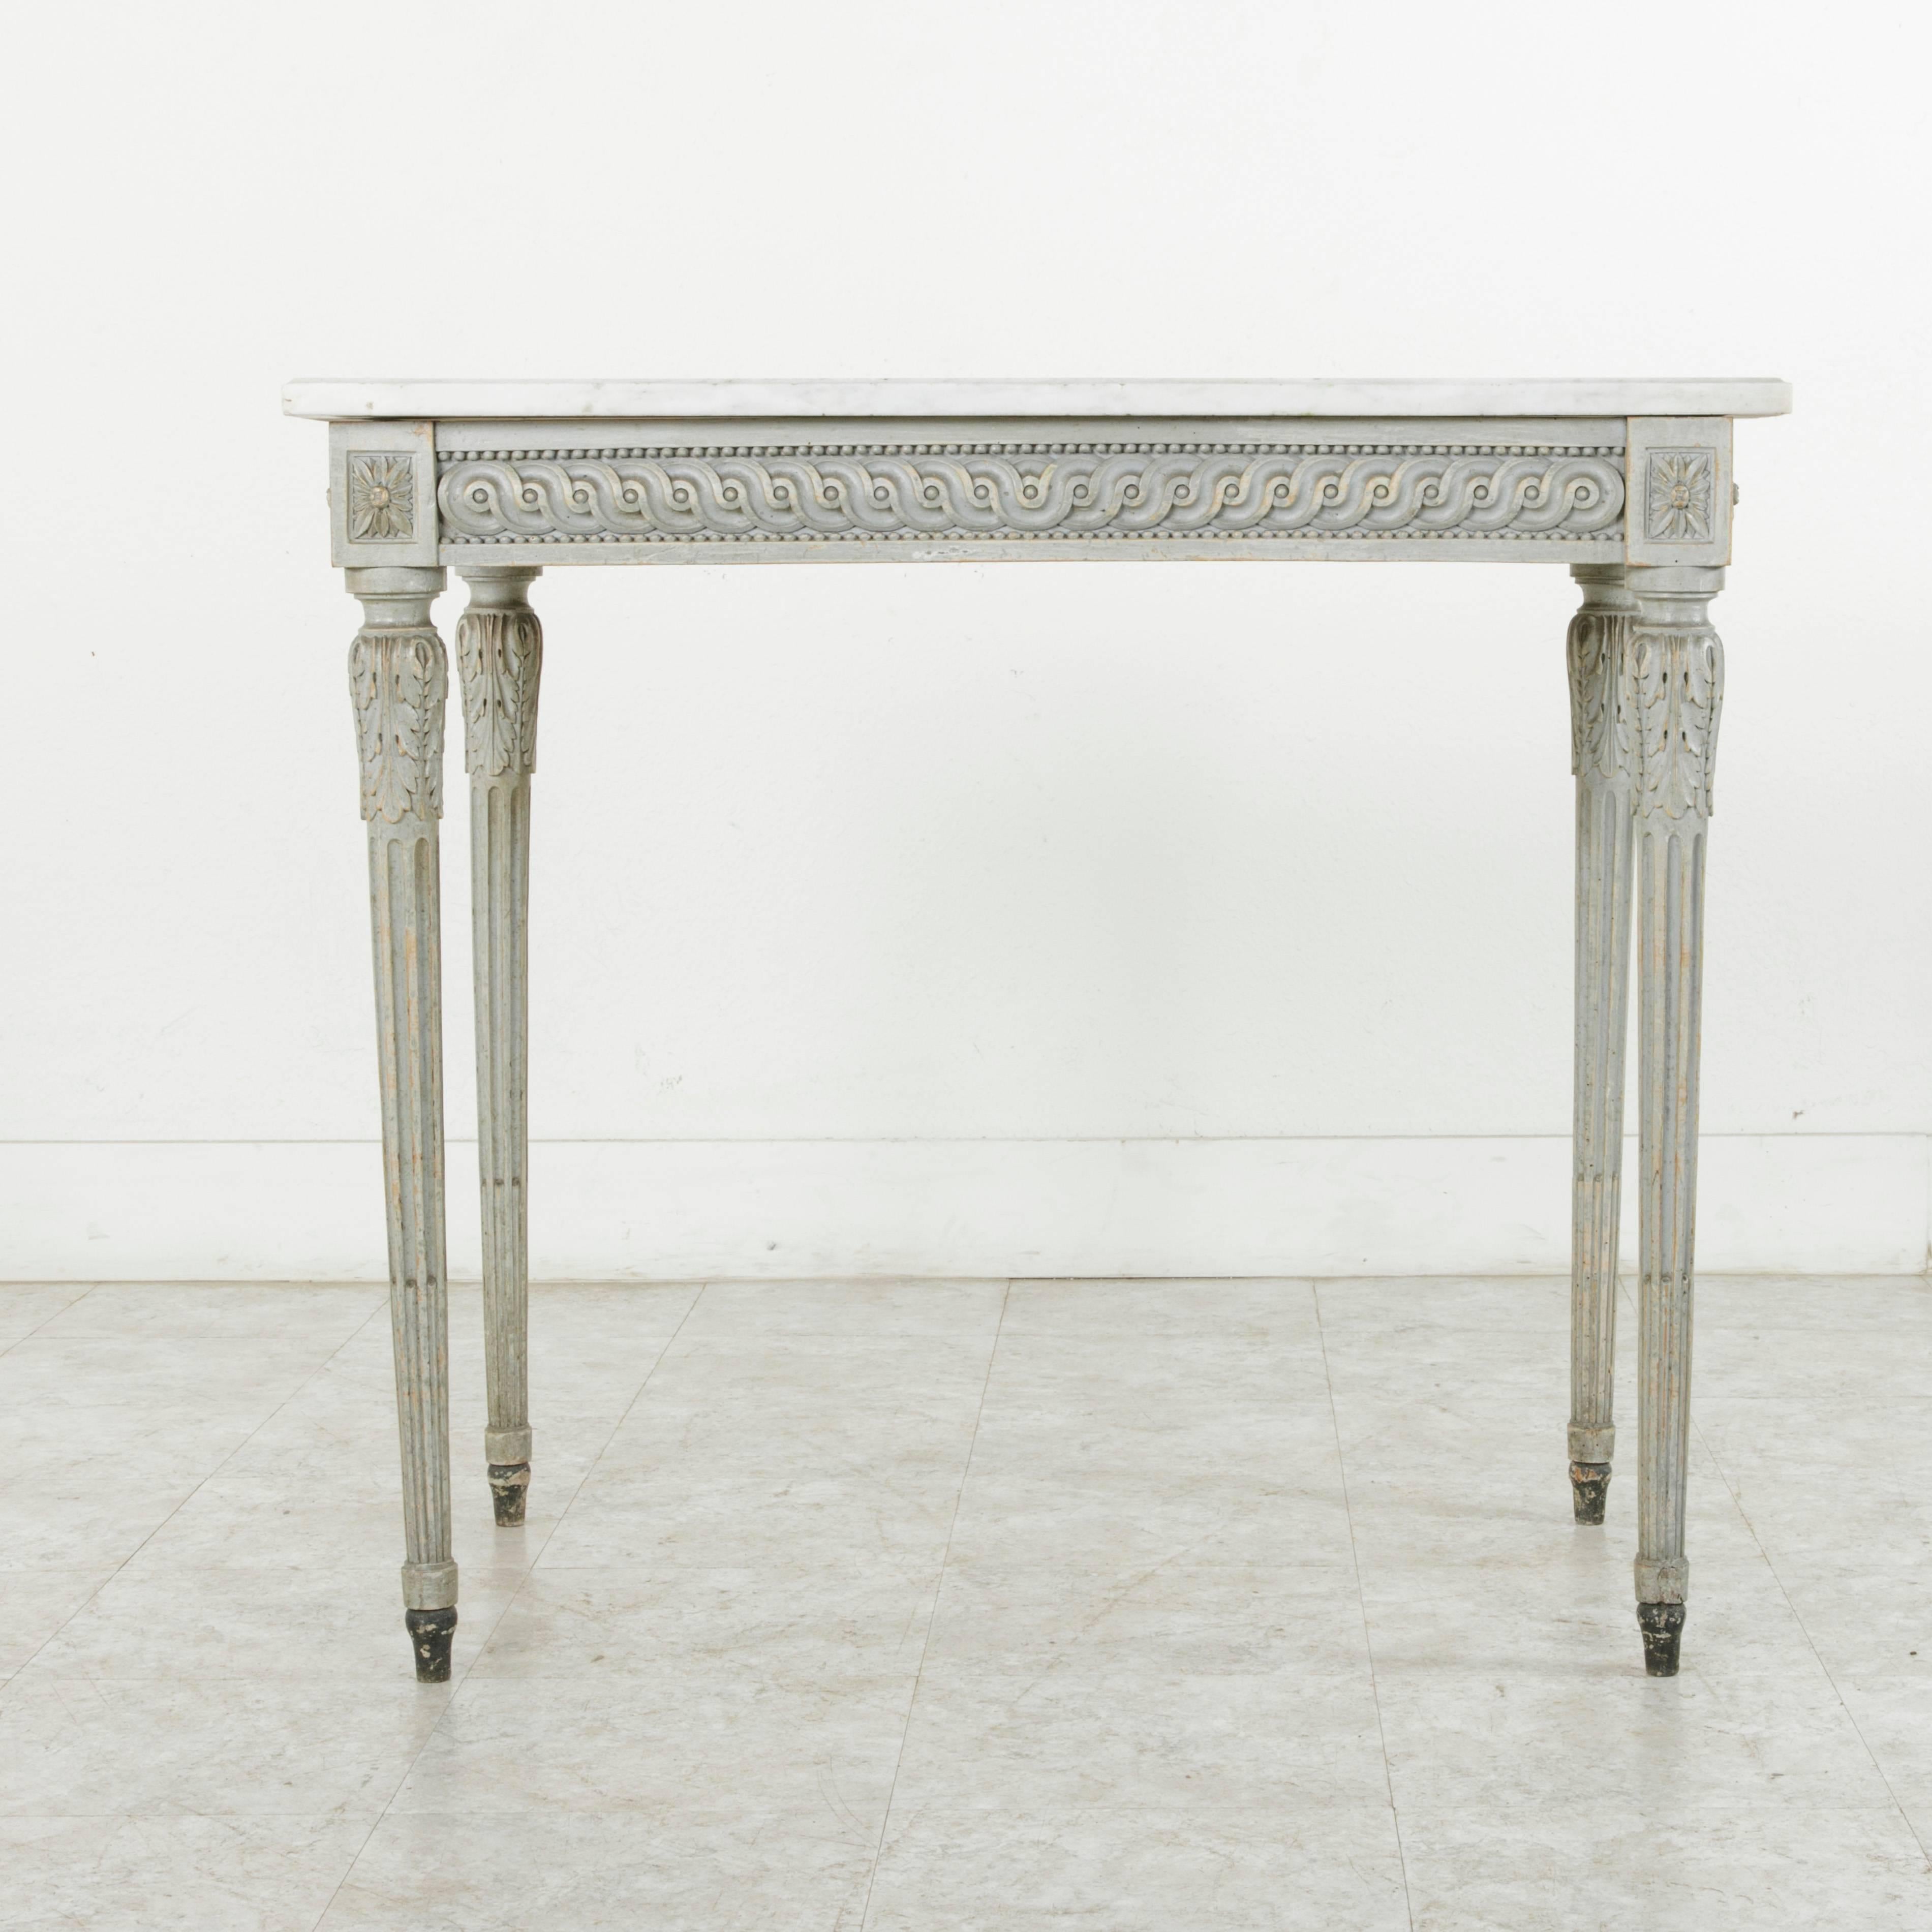 This French Louis XVI style console table from the nineteenth century features finely hand carved detailing of classic Louis XVI motifs on three sides.  Interlaced scrolling between rows of beading are joined by rosettes at the die joints. Resting